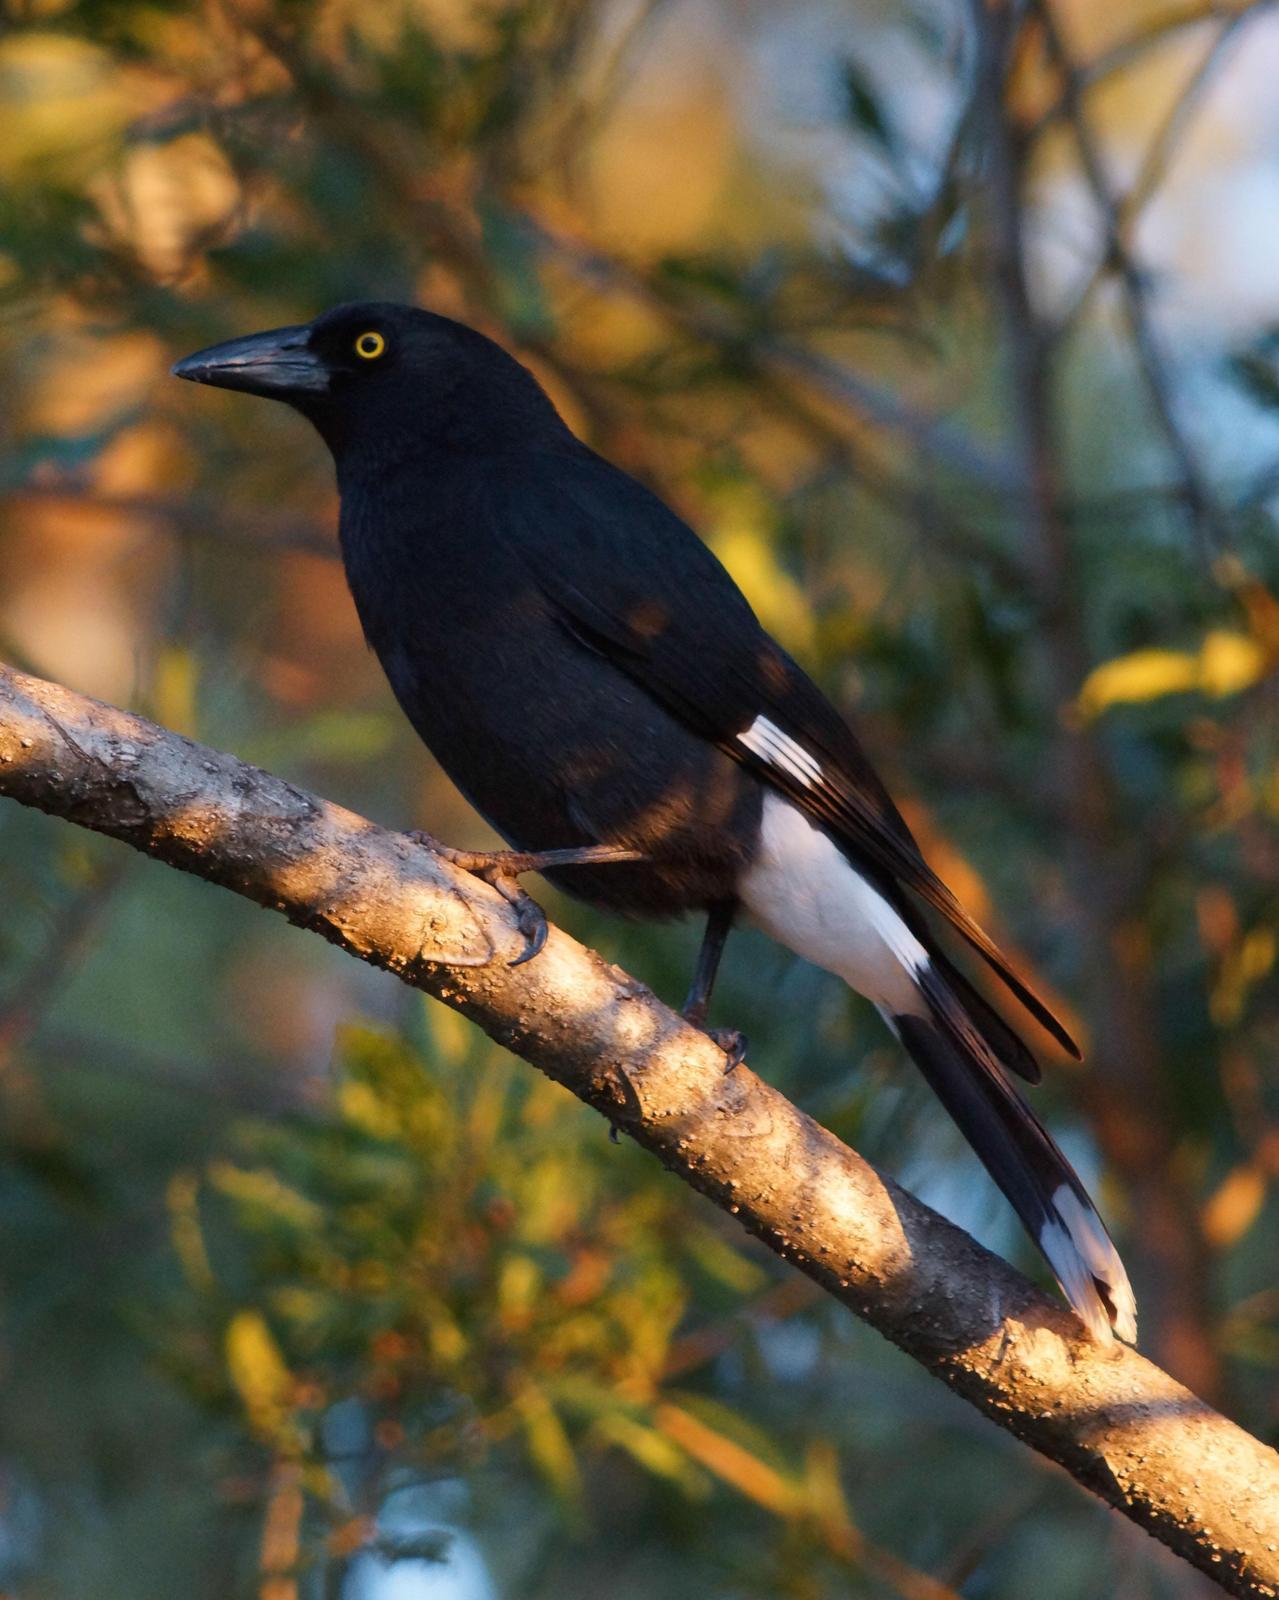 Pied Currawong Photo by Steve Percival